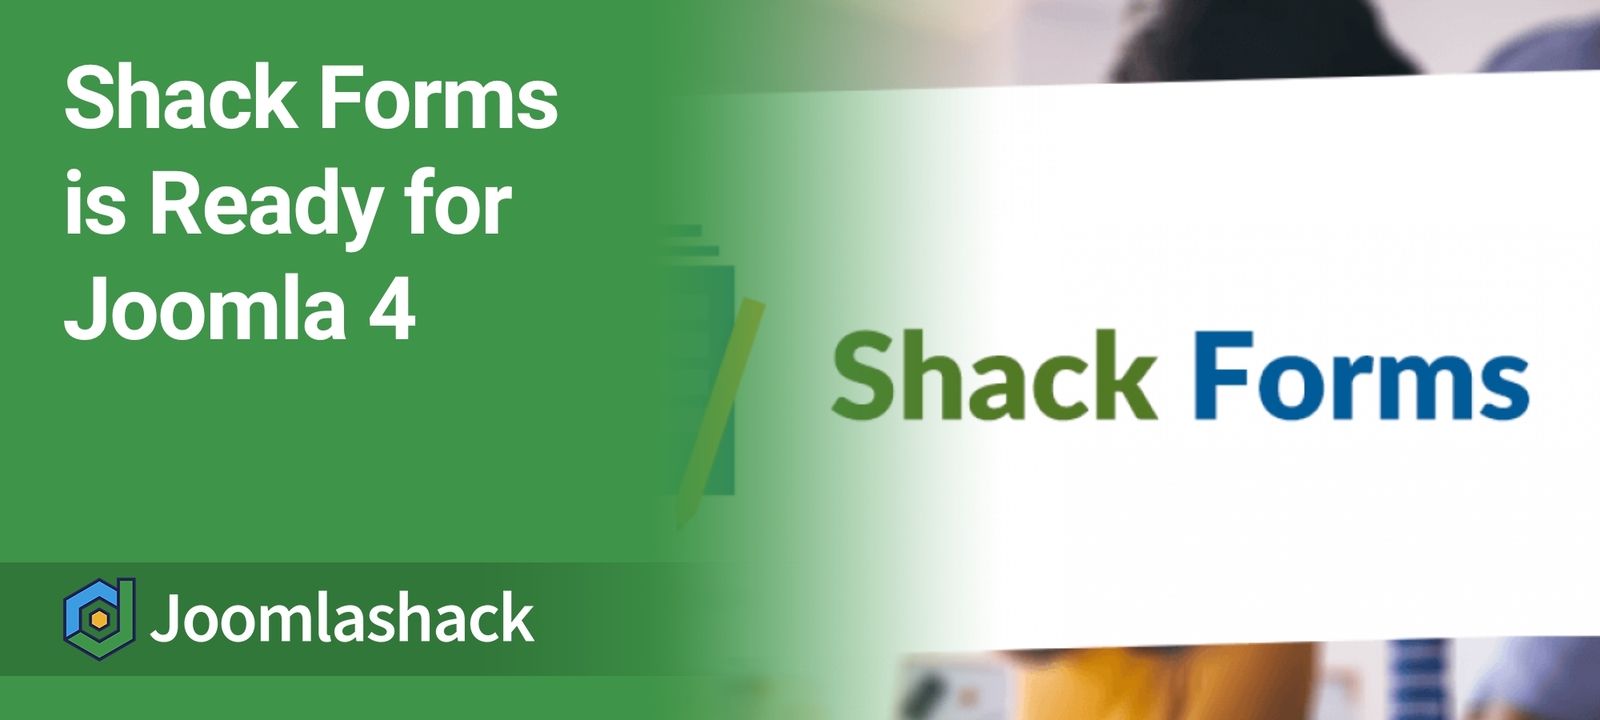 Shack Forms is Ready for Joomla 4